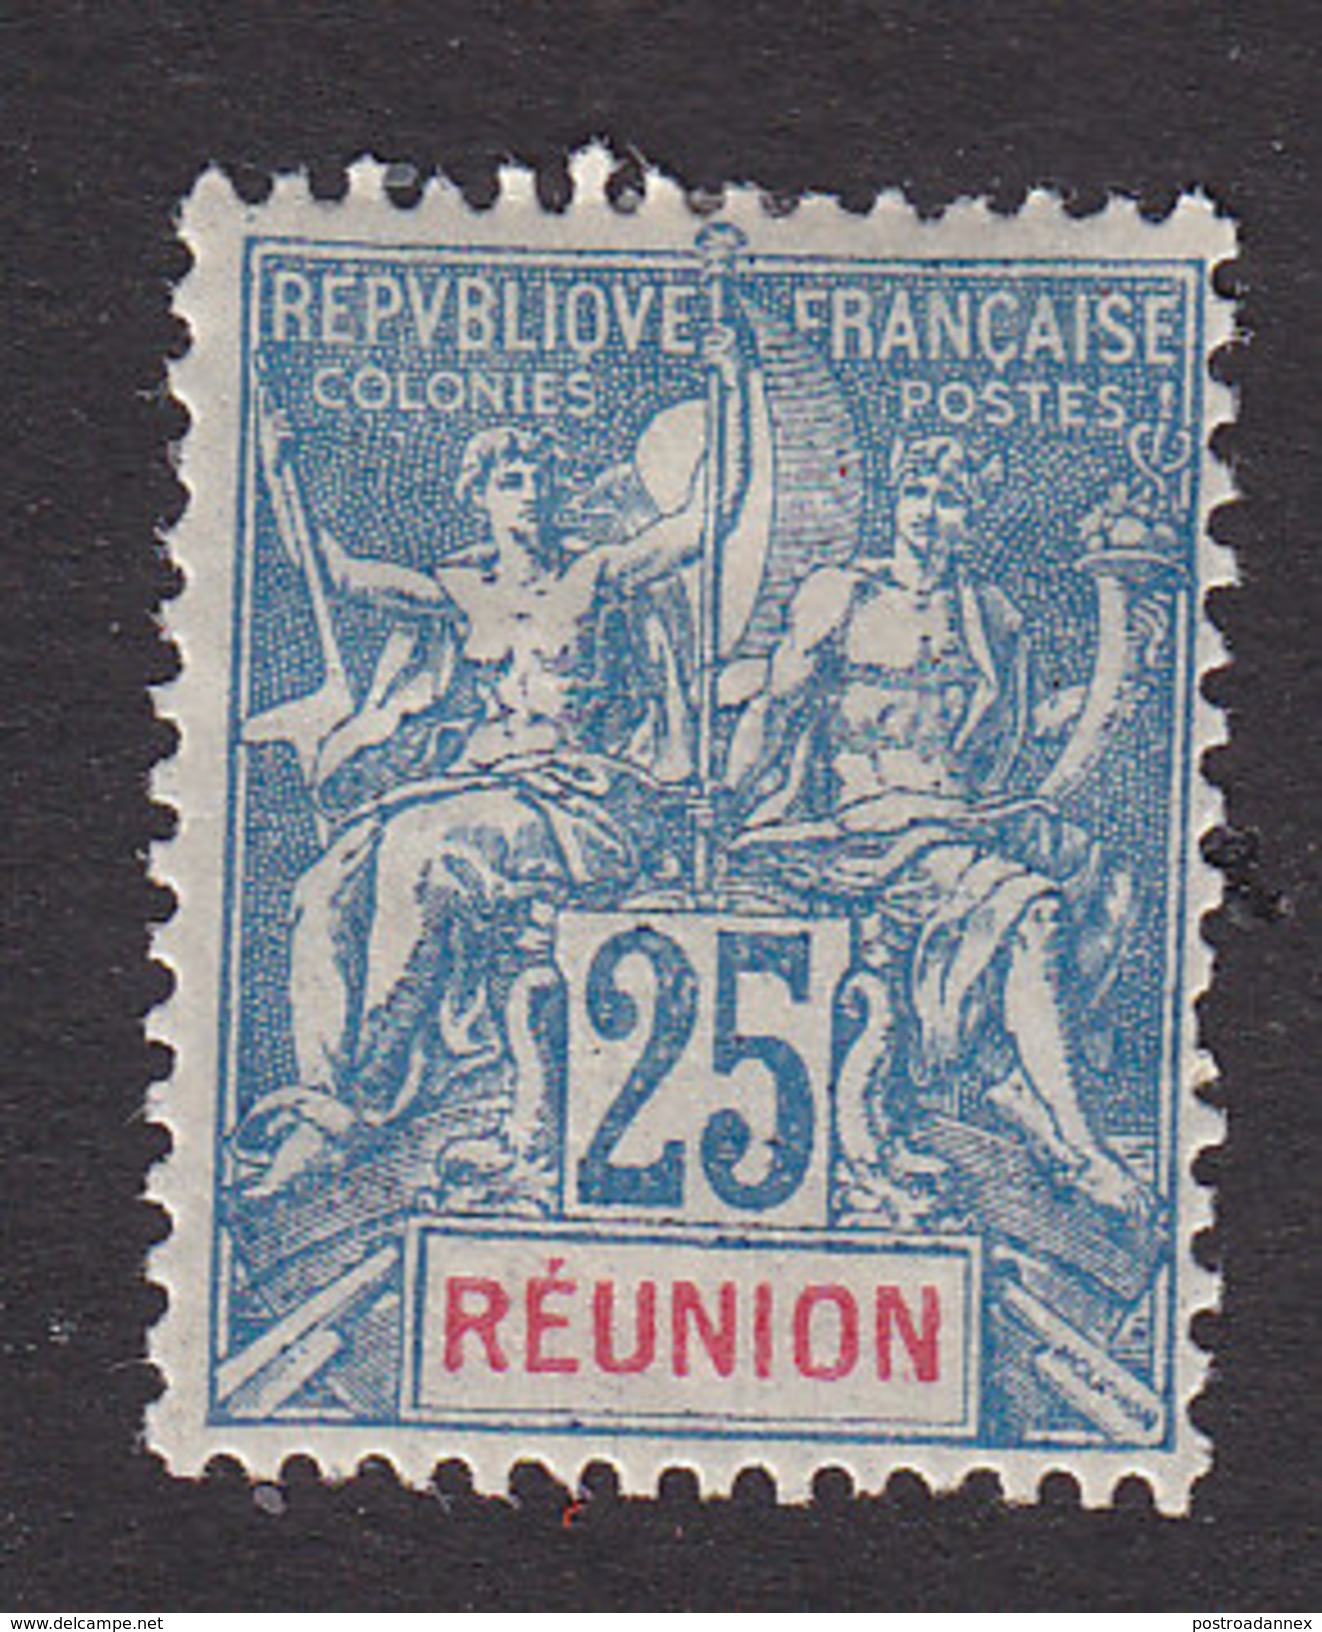 Reunion, Scott #45, Mint Hinged, Navigation And Commerce, Issued 1900 - Unused Stamps